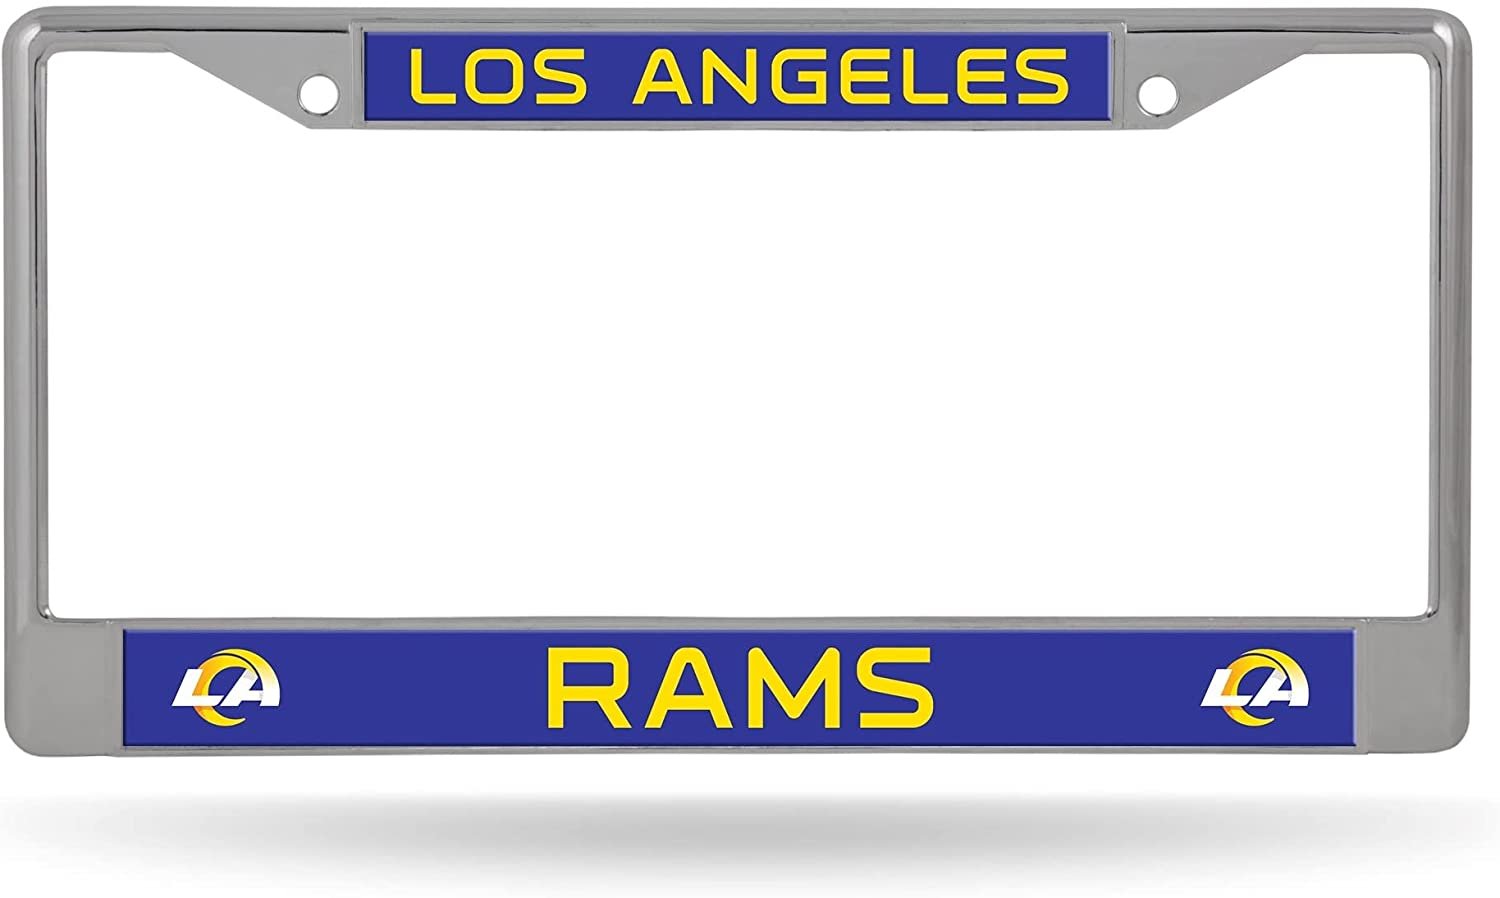 Los Angeles Rams Premium Metal License Plate Frame Chrome Tag Cover, 12x6 Inch